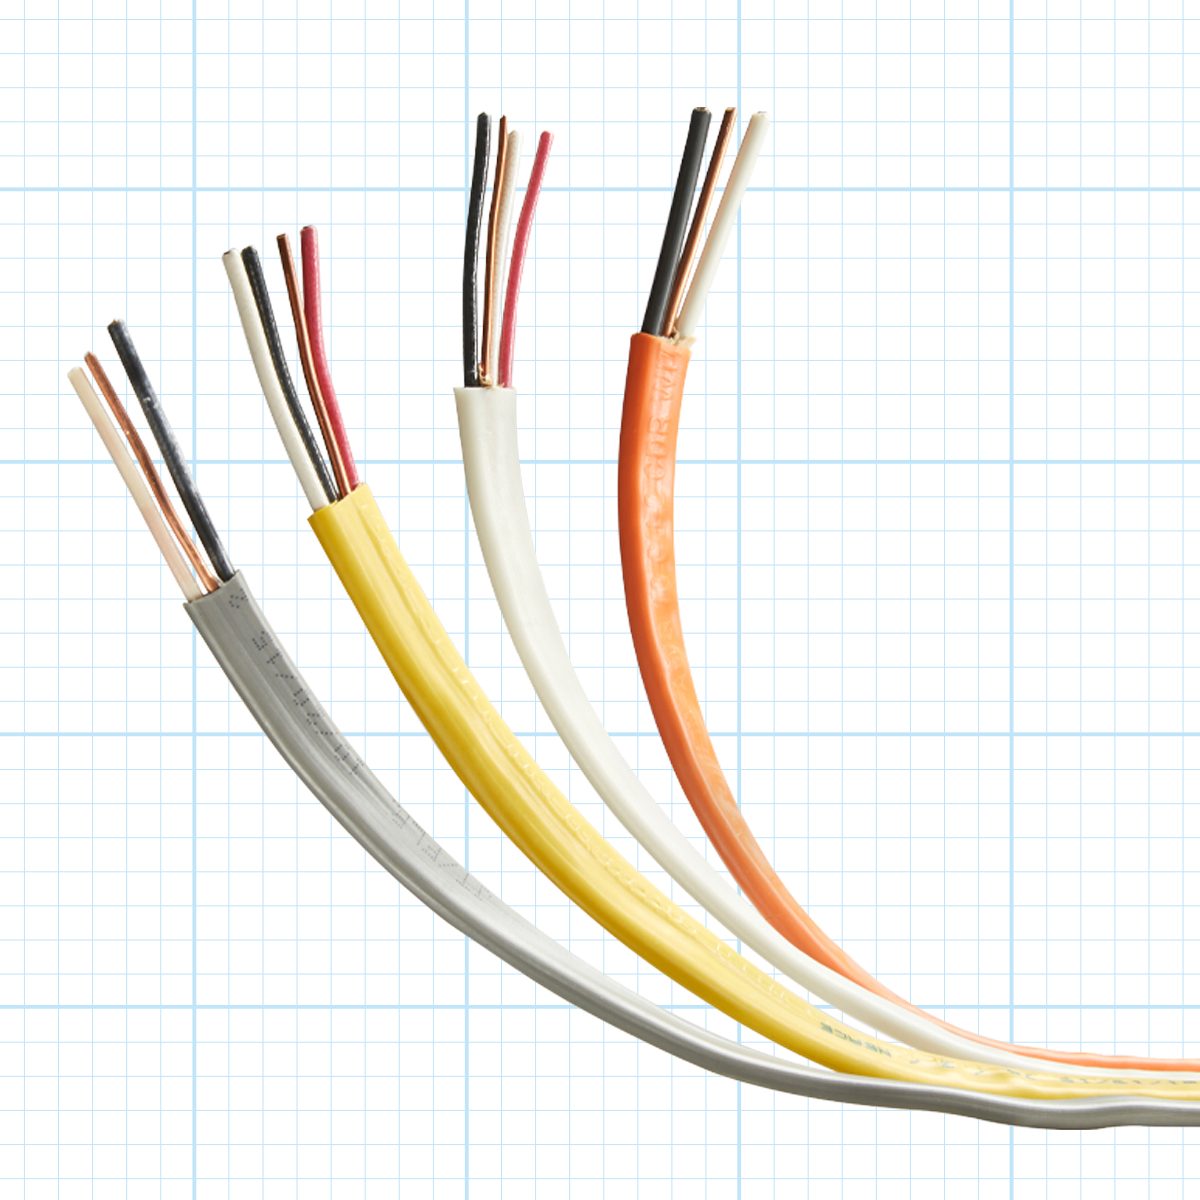 What are Wires Made Of?, Electrical Wires